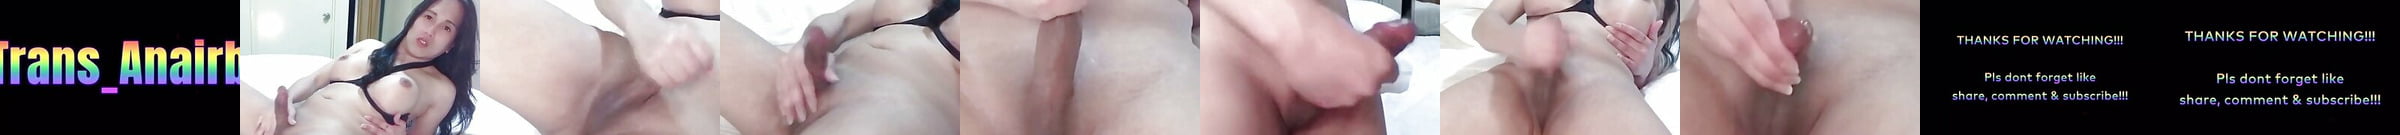 Featured Hot Cumshot Shemale Porn Videos Xhamster